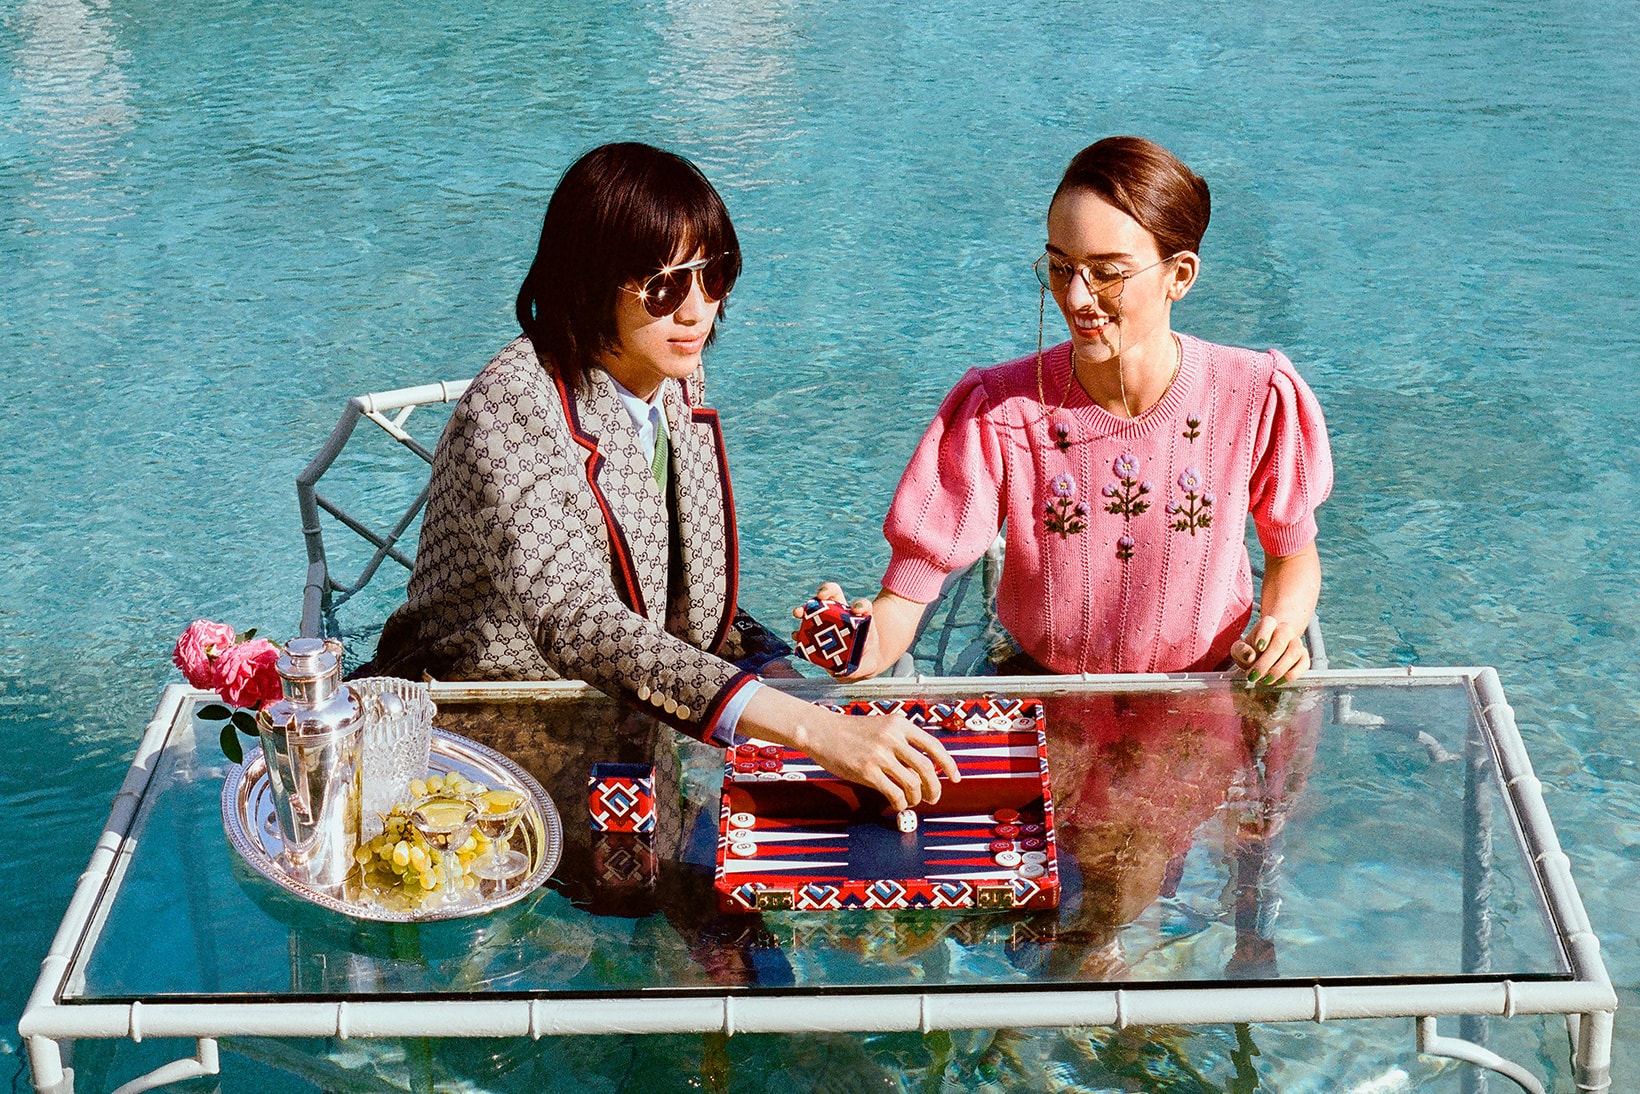 Alessandro Michele Gucci Lifestyle Collection Games Leisure Stationery Swimming Pool Sweater Jacket Shades